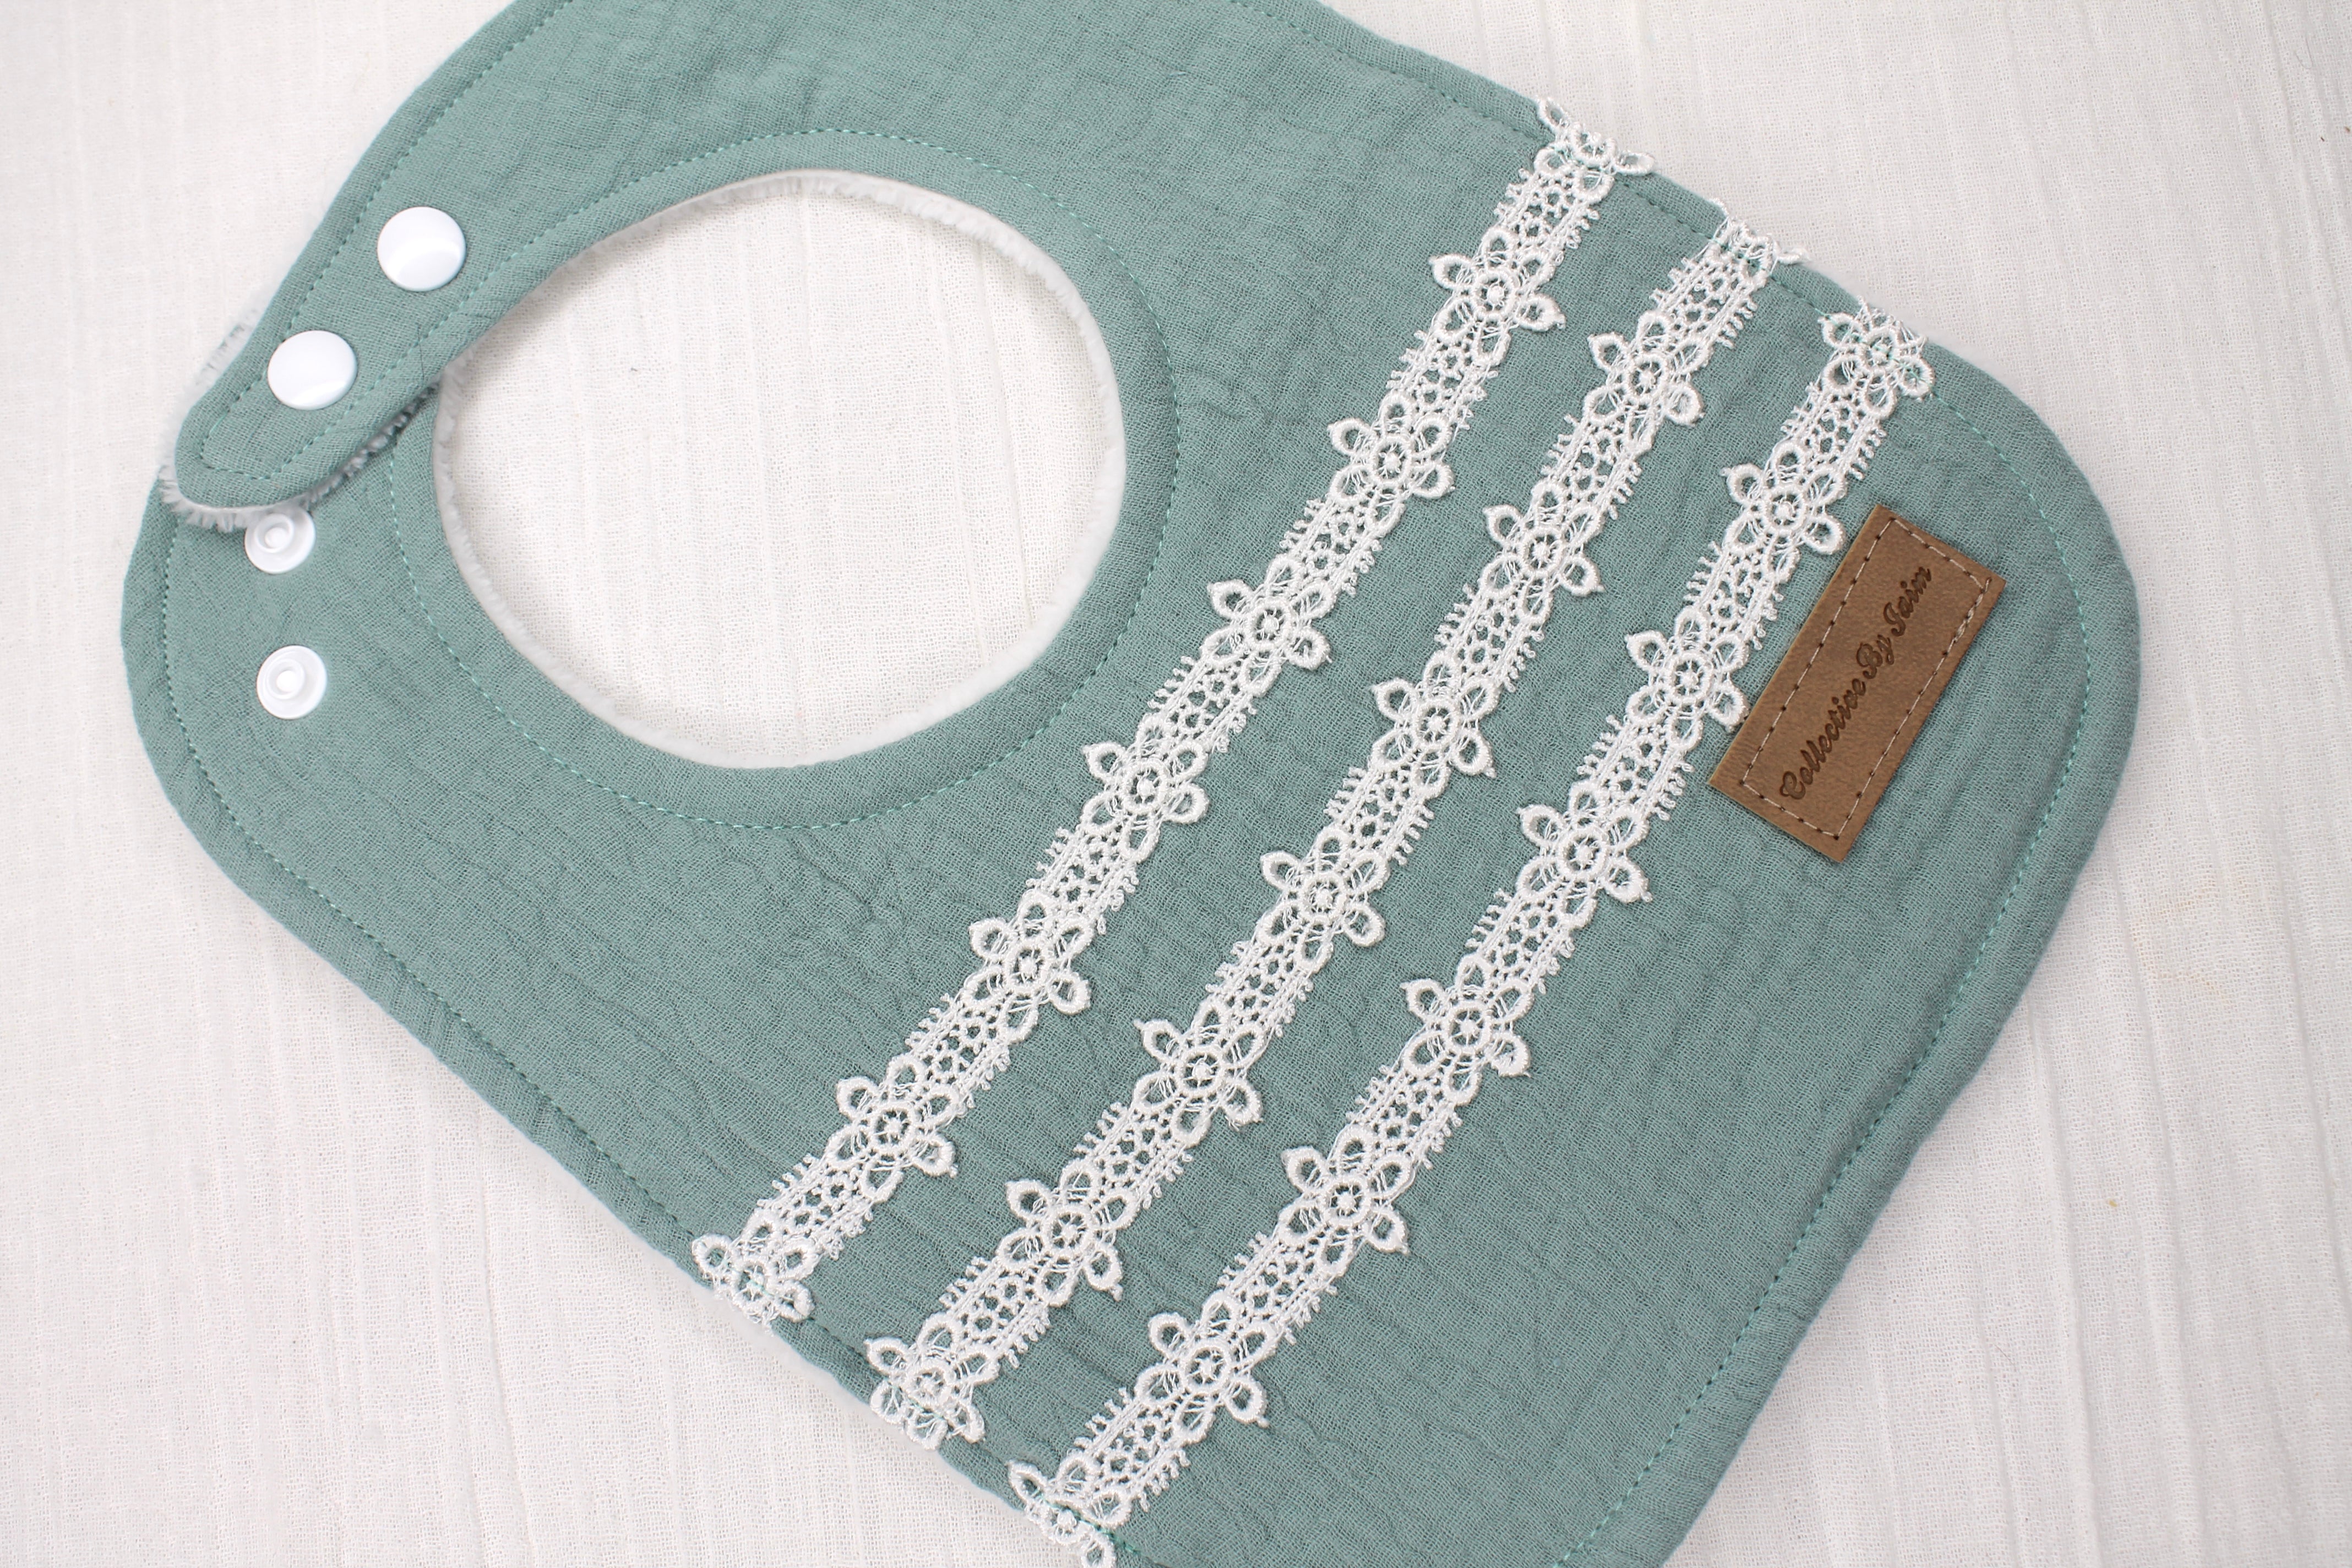 Ocean Double Cloth Daisy Chain Lace Bib with Fleece Backing